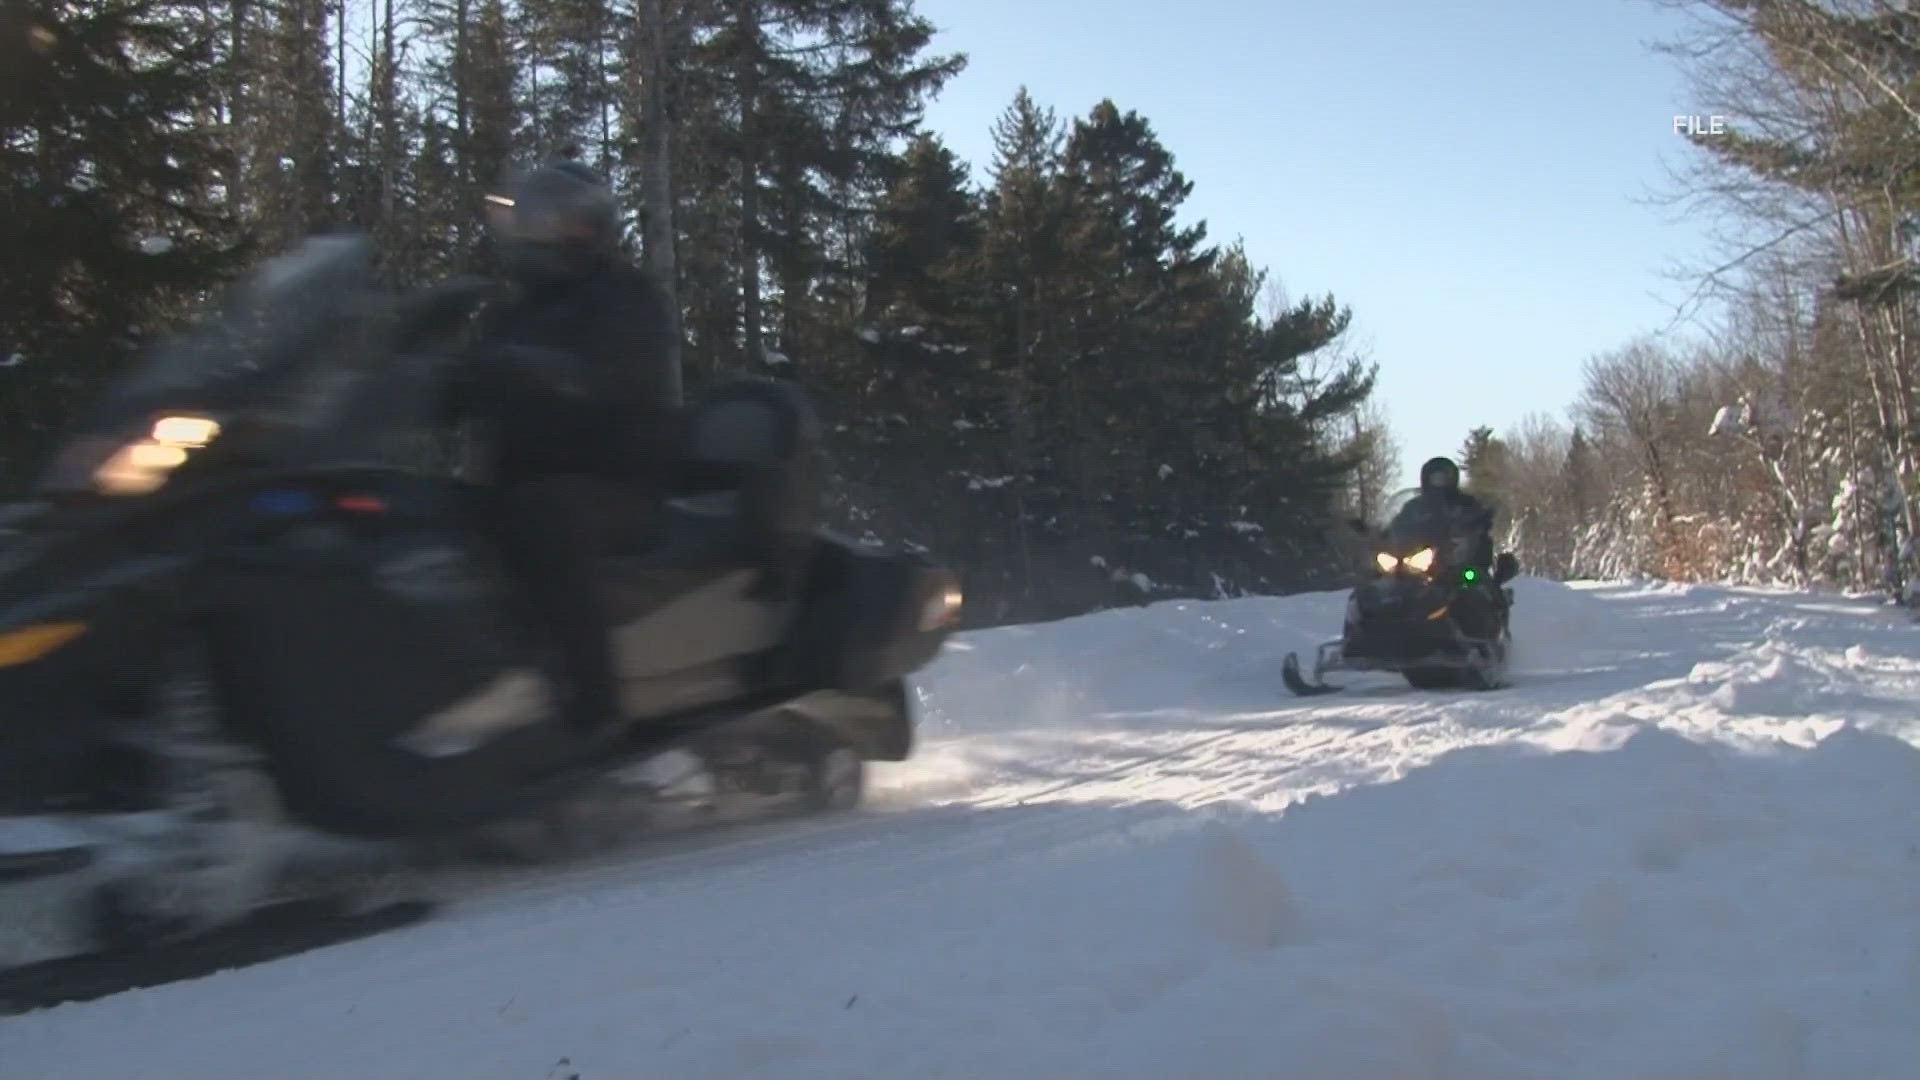 As the season starts to slow down, some parts of the state still have plenty of snow on the trails.